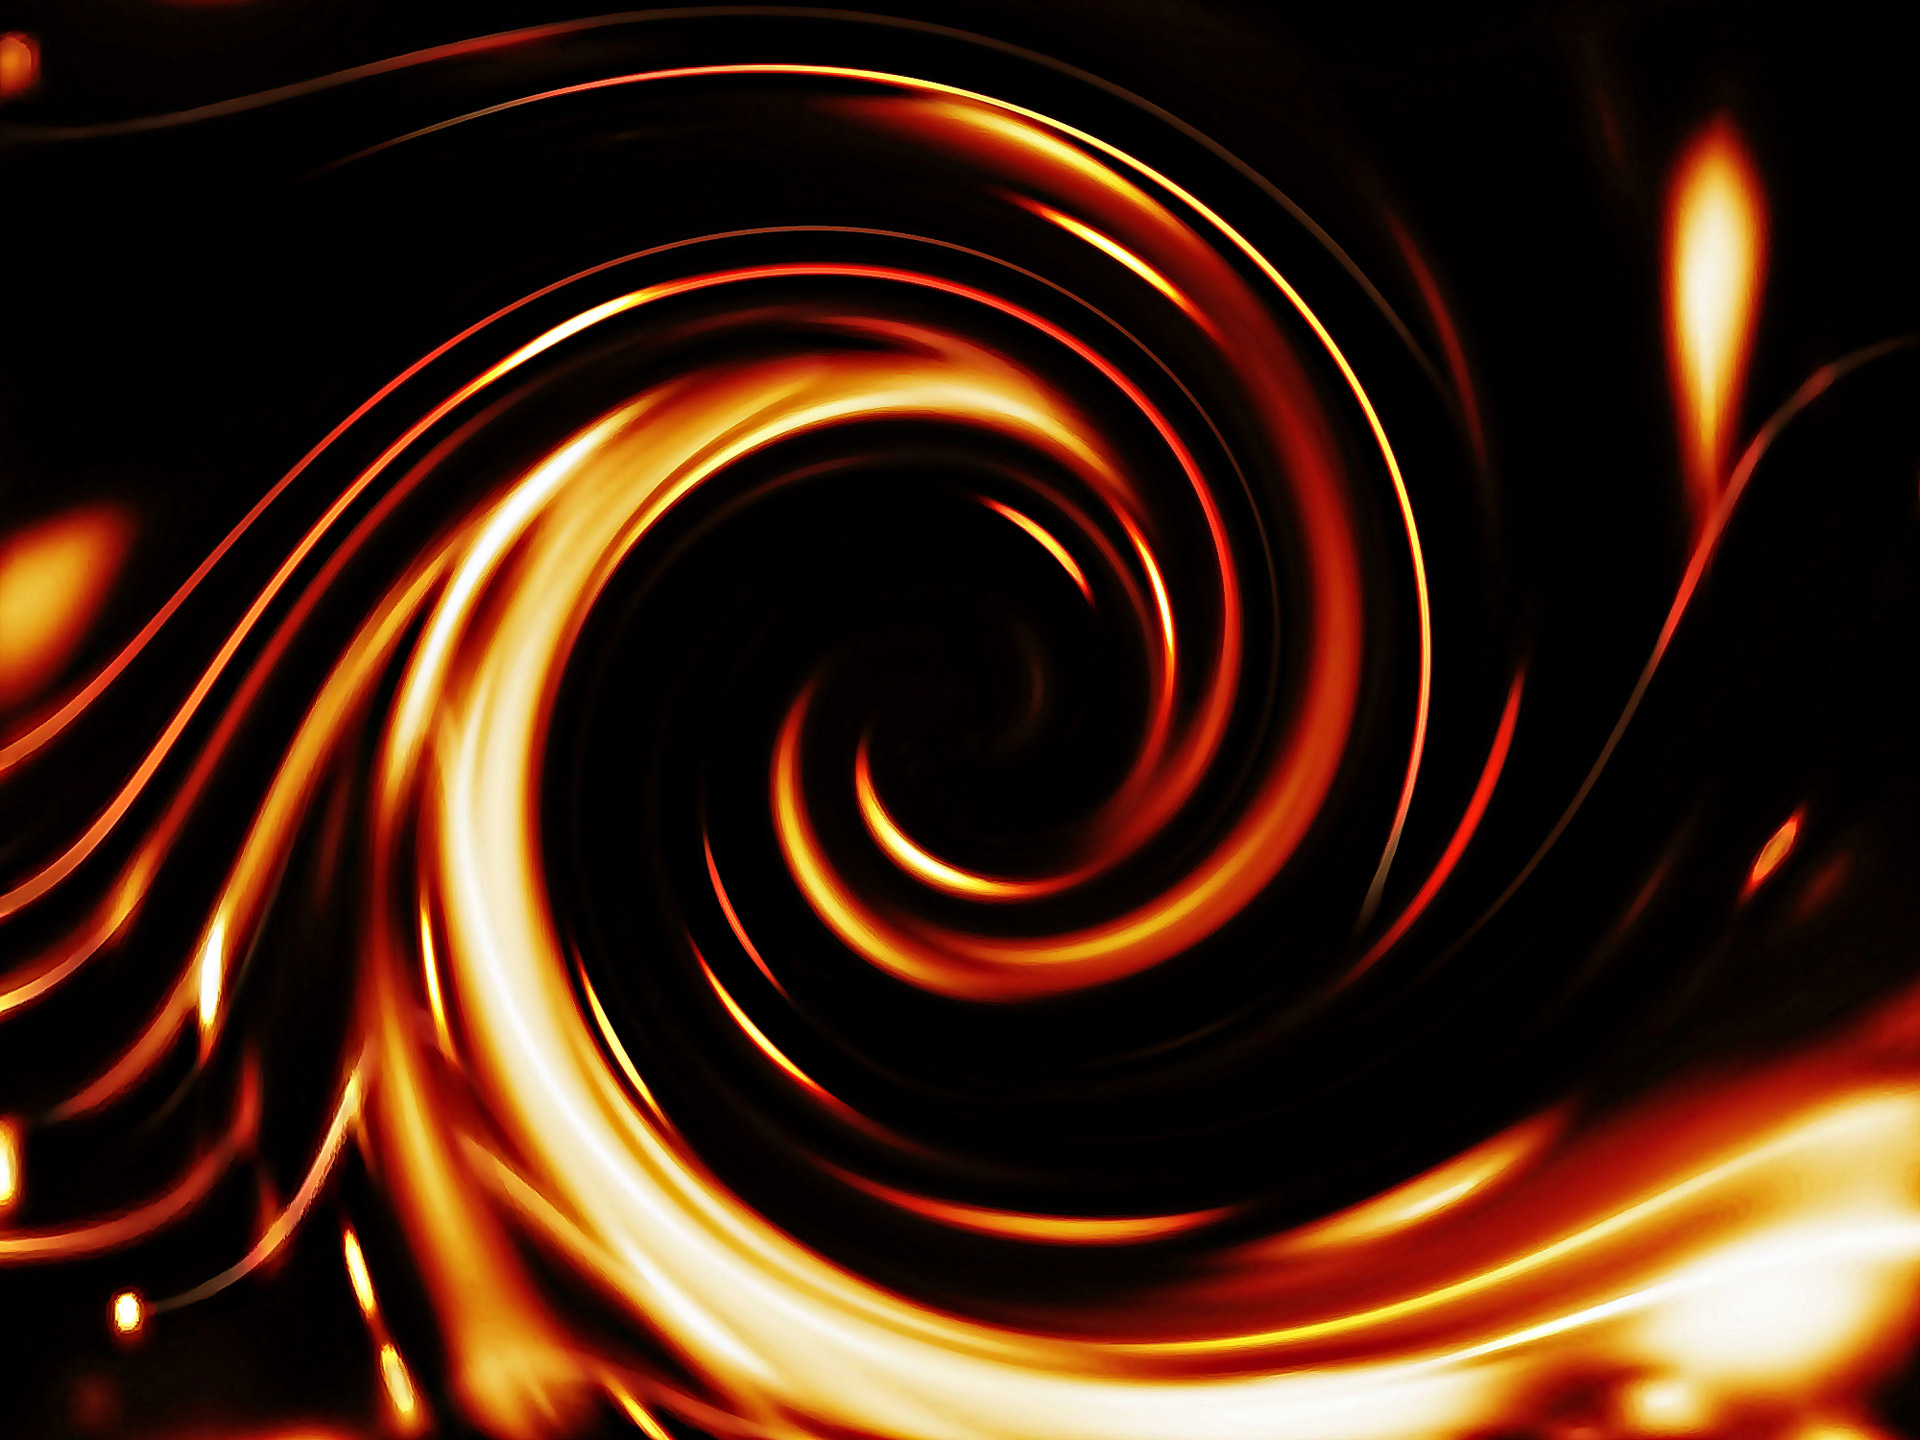 Fire Spiral Out Of Focus